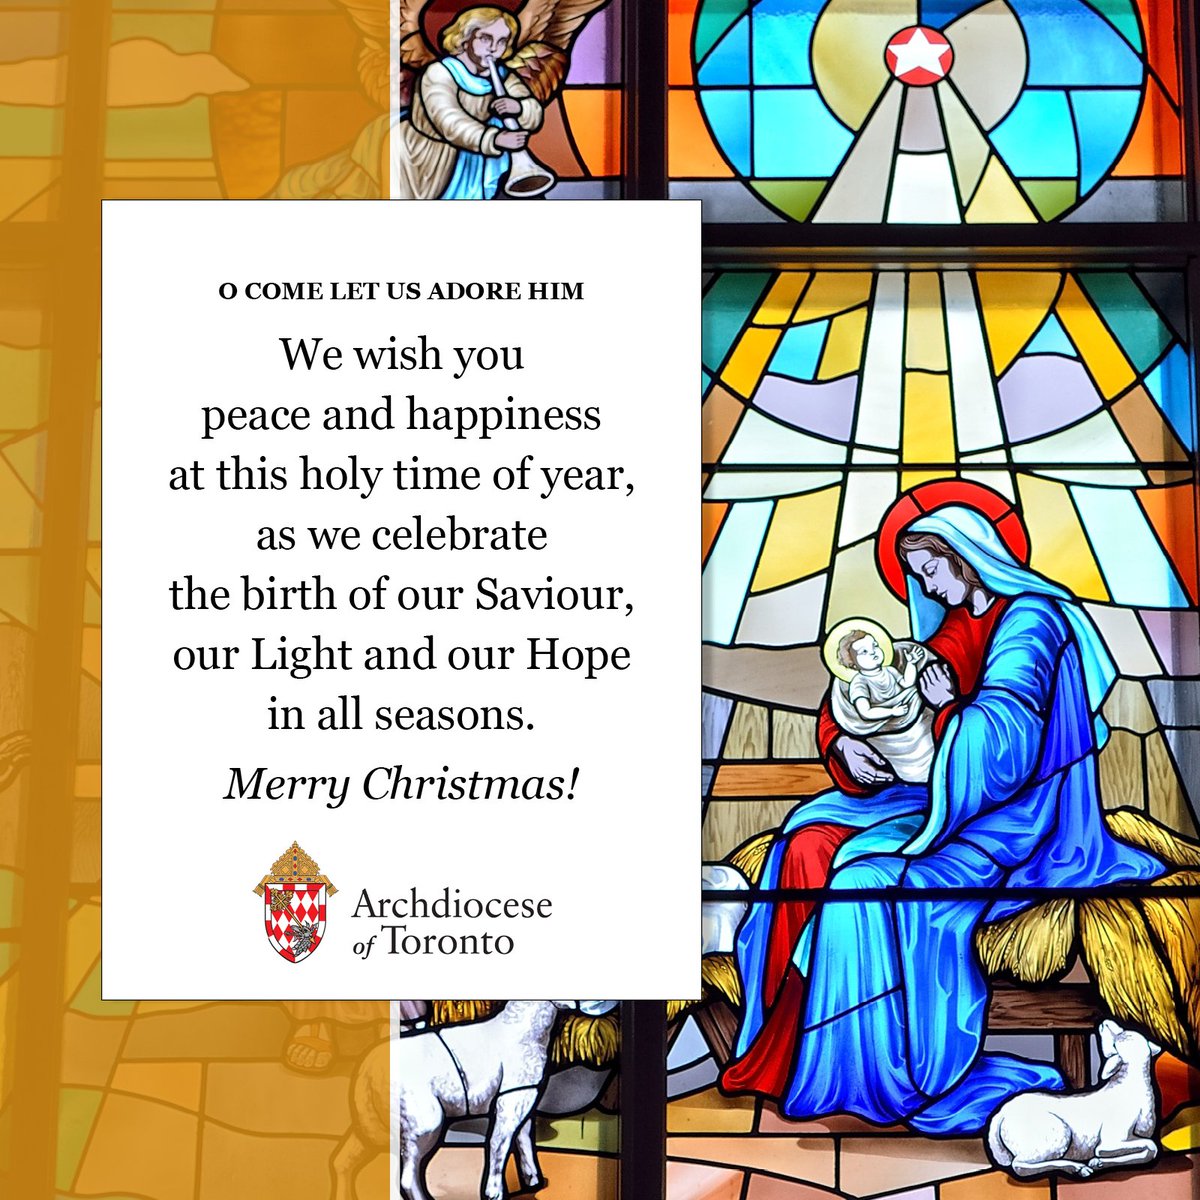 We wish you peace and happiness at this holy time of year, as we celebrate the birth of our Saviour, our Light and our Hope in all seasons. Merry Christmas! For Mass times, please contact a parish near you: archtoronto.org #catholicTO